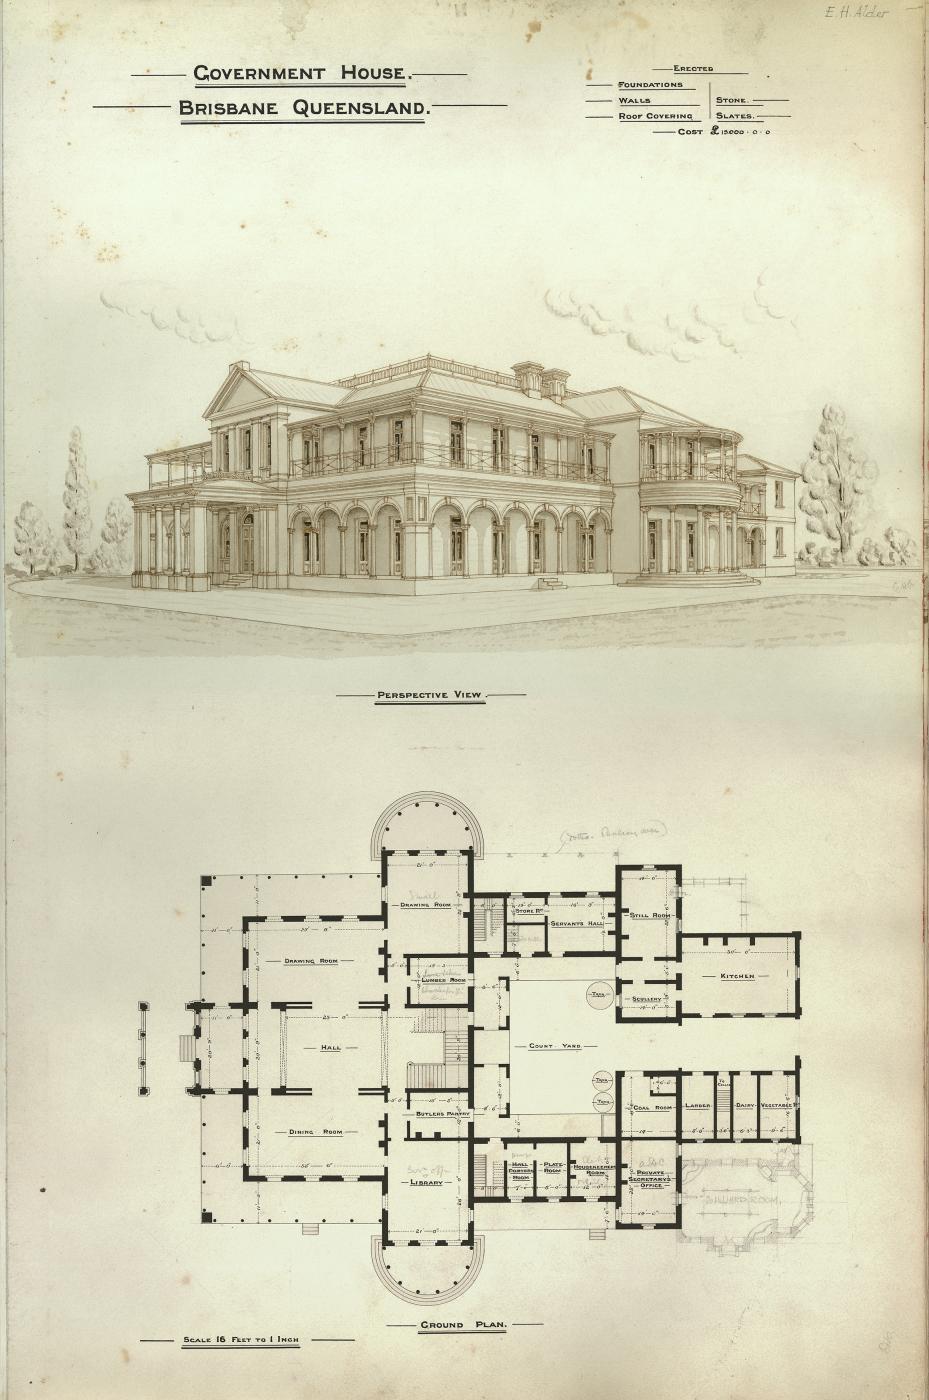 Architectural plan of Government House, Brisbane